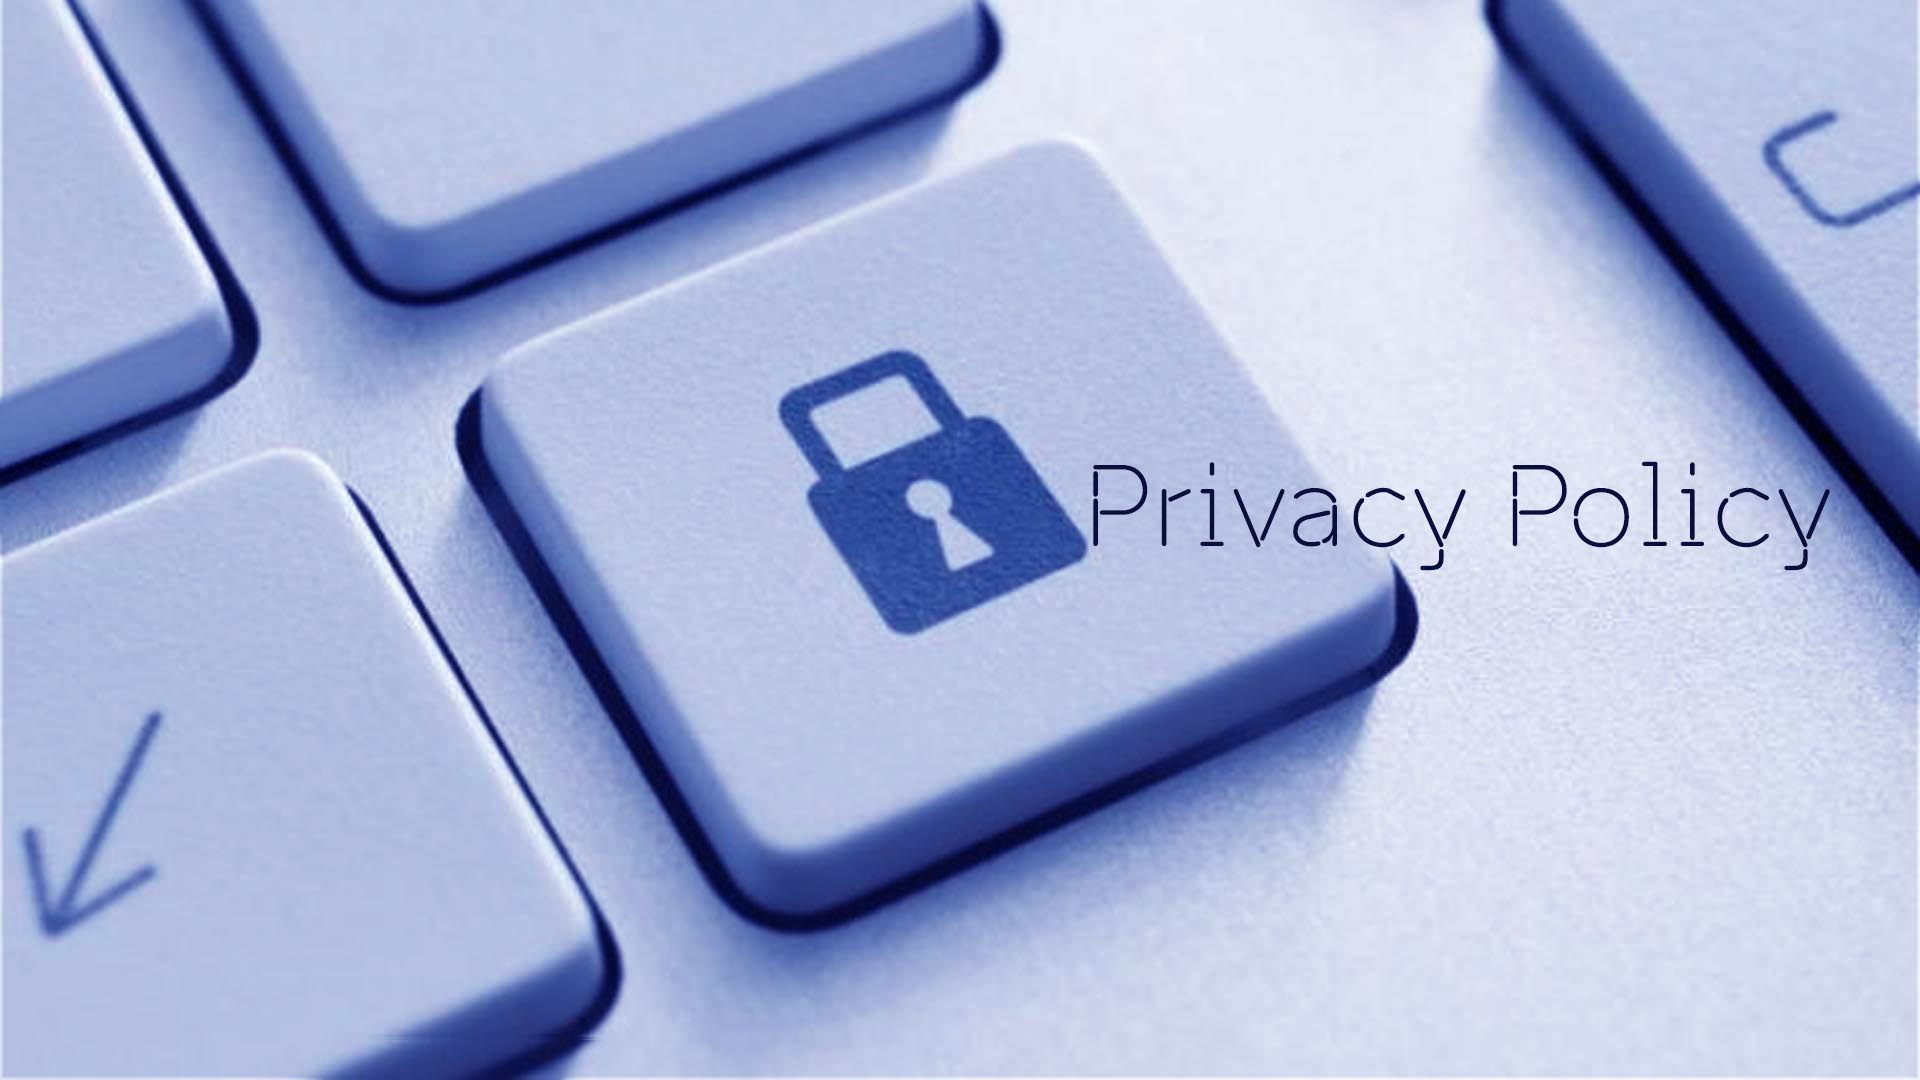 Privacy Policy | The Mobile Association